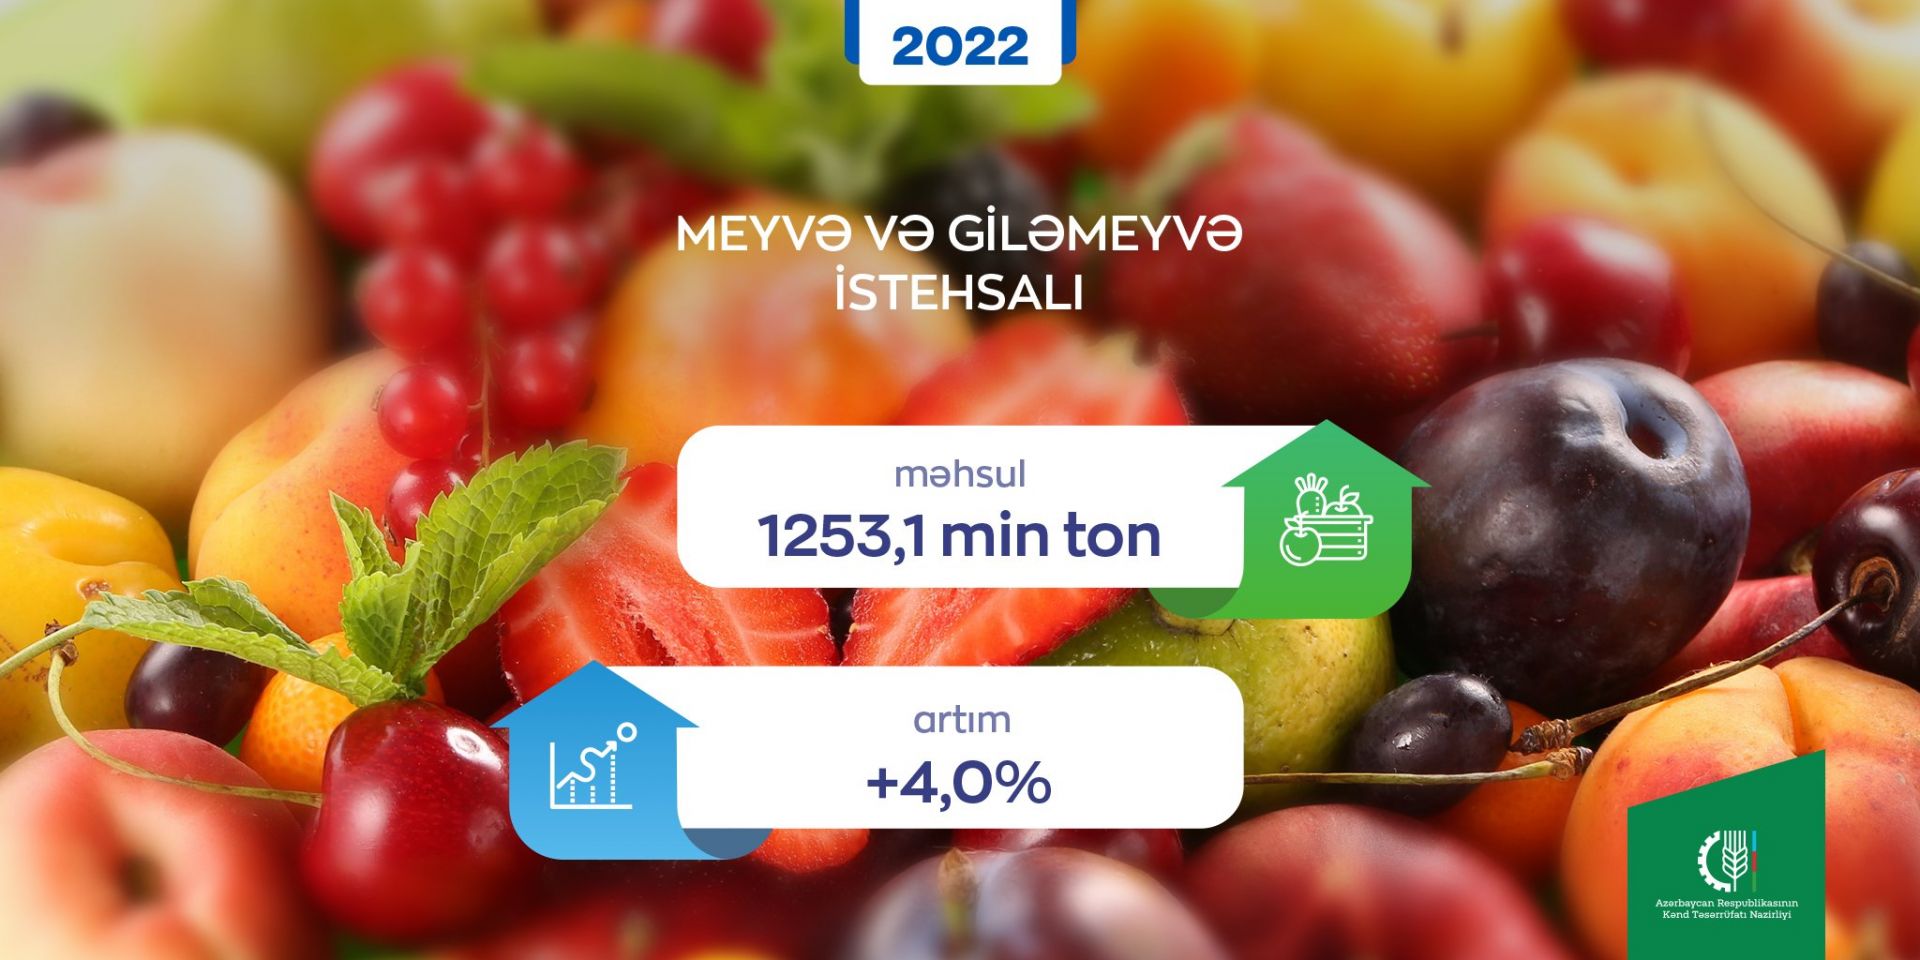 Production of fruits and berries increases in Azerbaijan in 2022